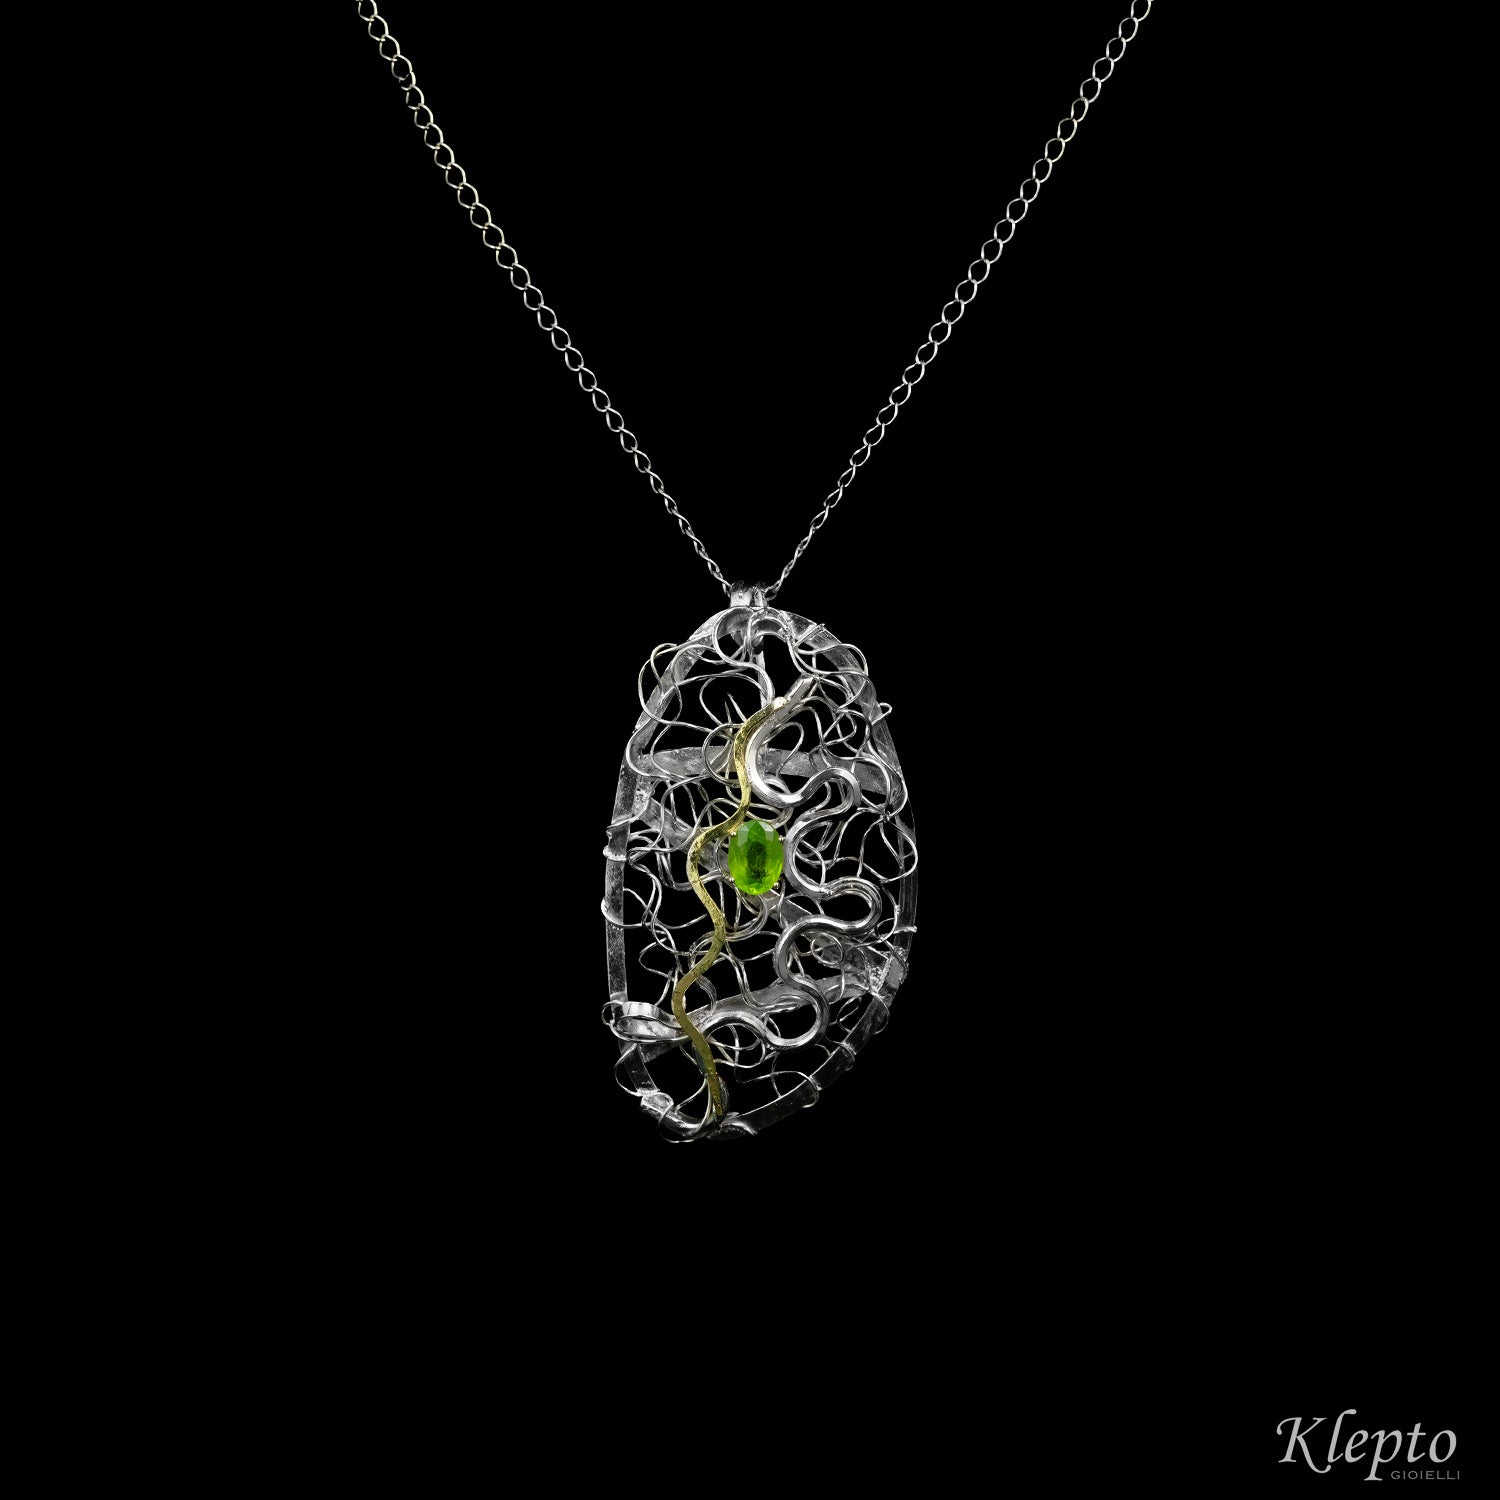 Pendant in Silnova® Silver wire with Peridot and yellow gold